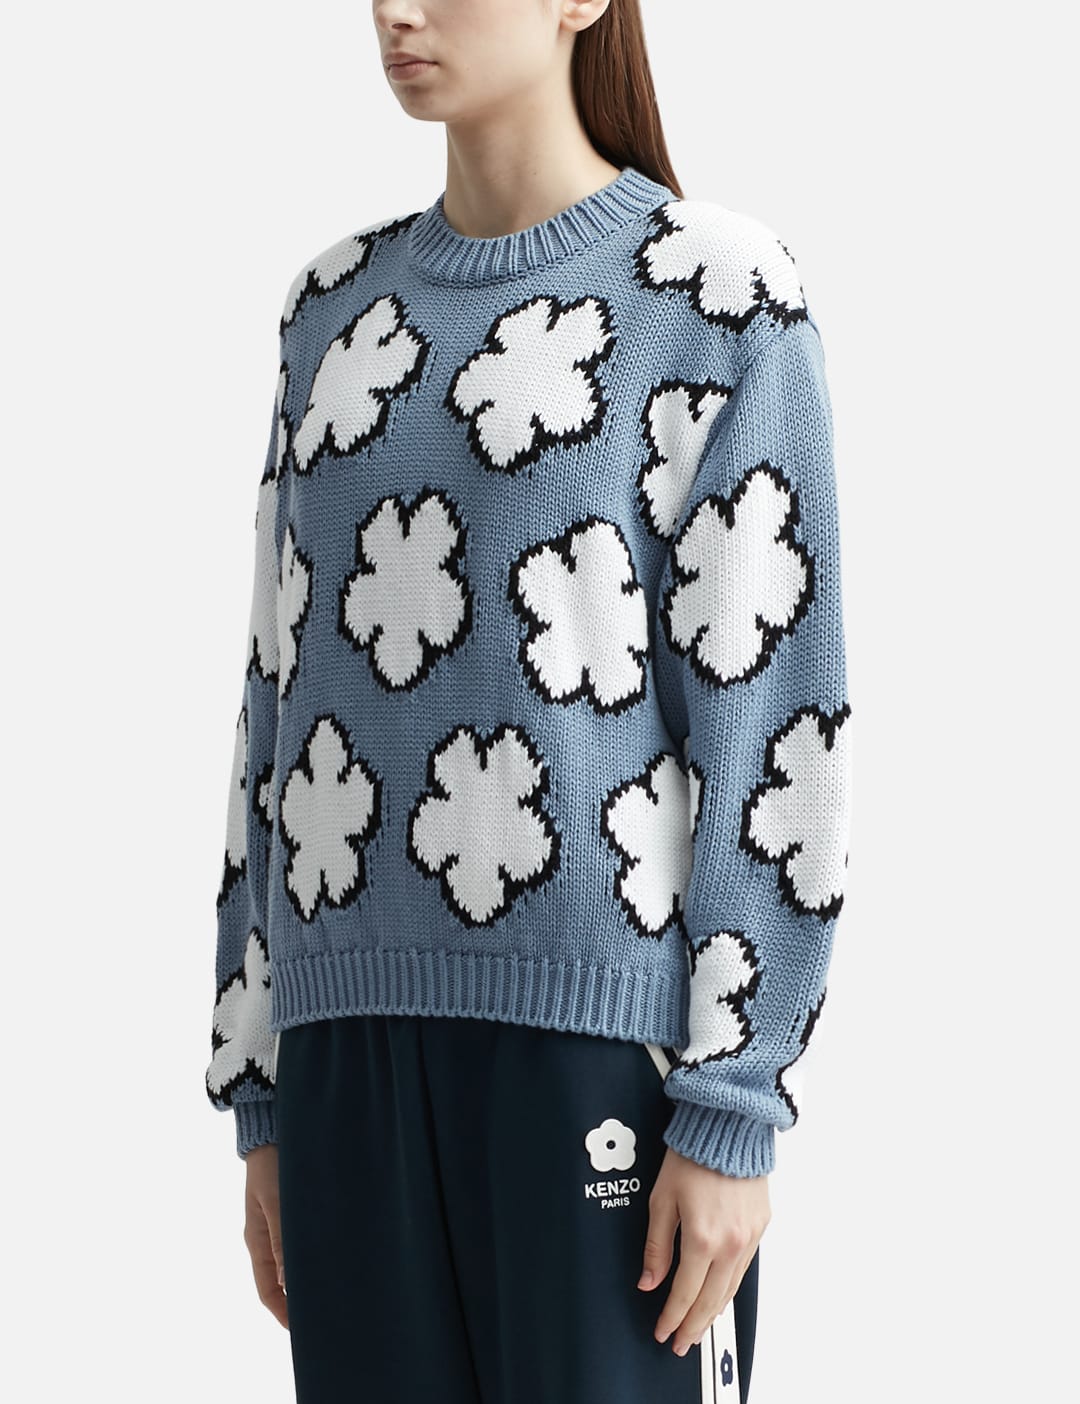 Kenzo - Boke Flower Jumper | HBX - Globally Curated Fashion and